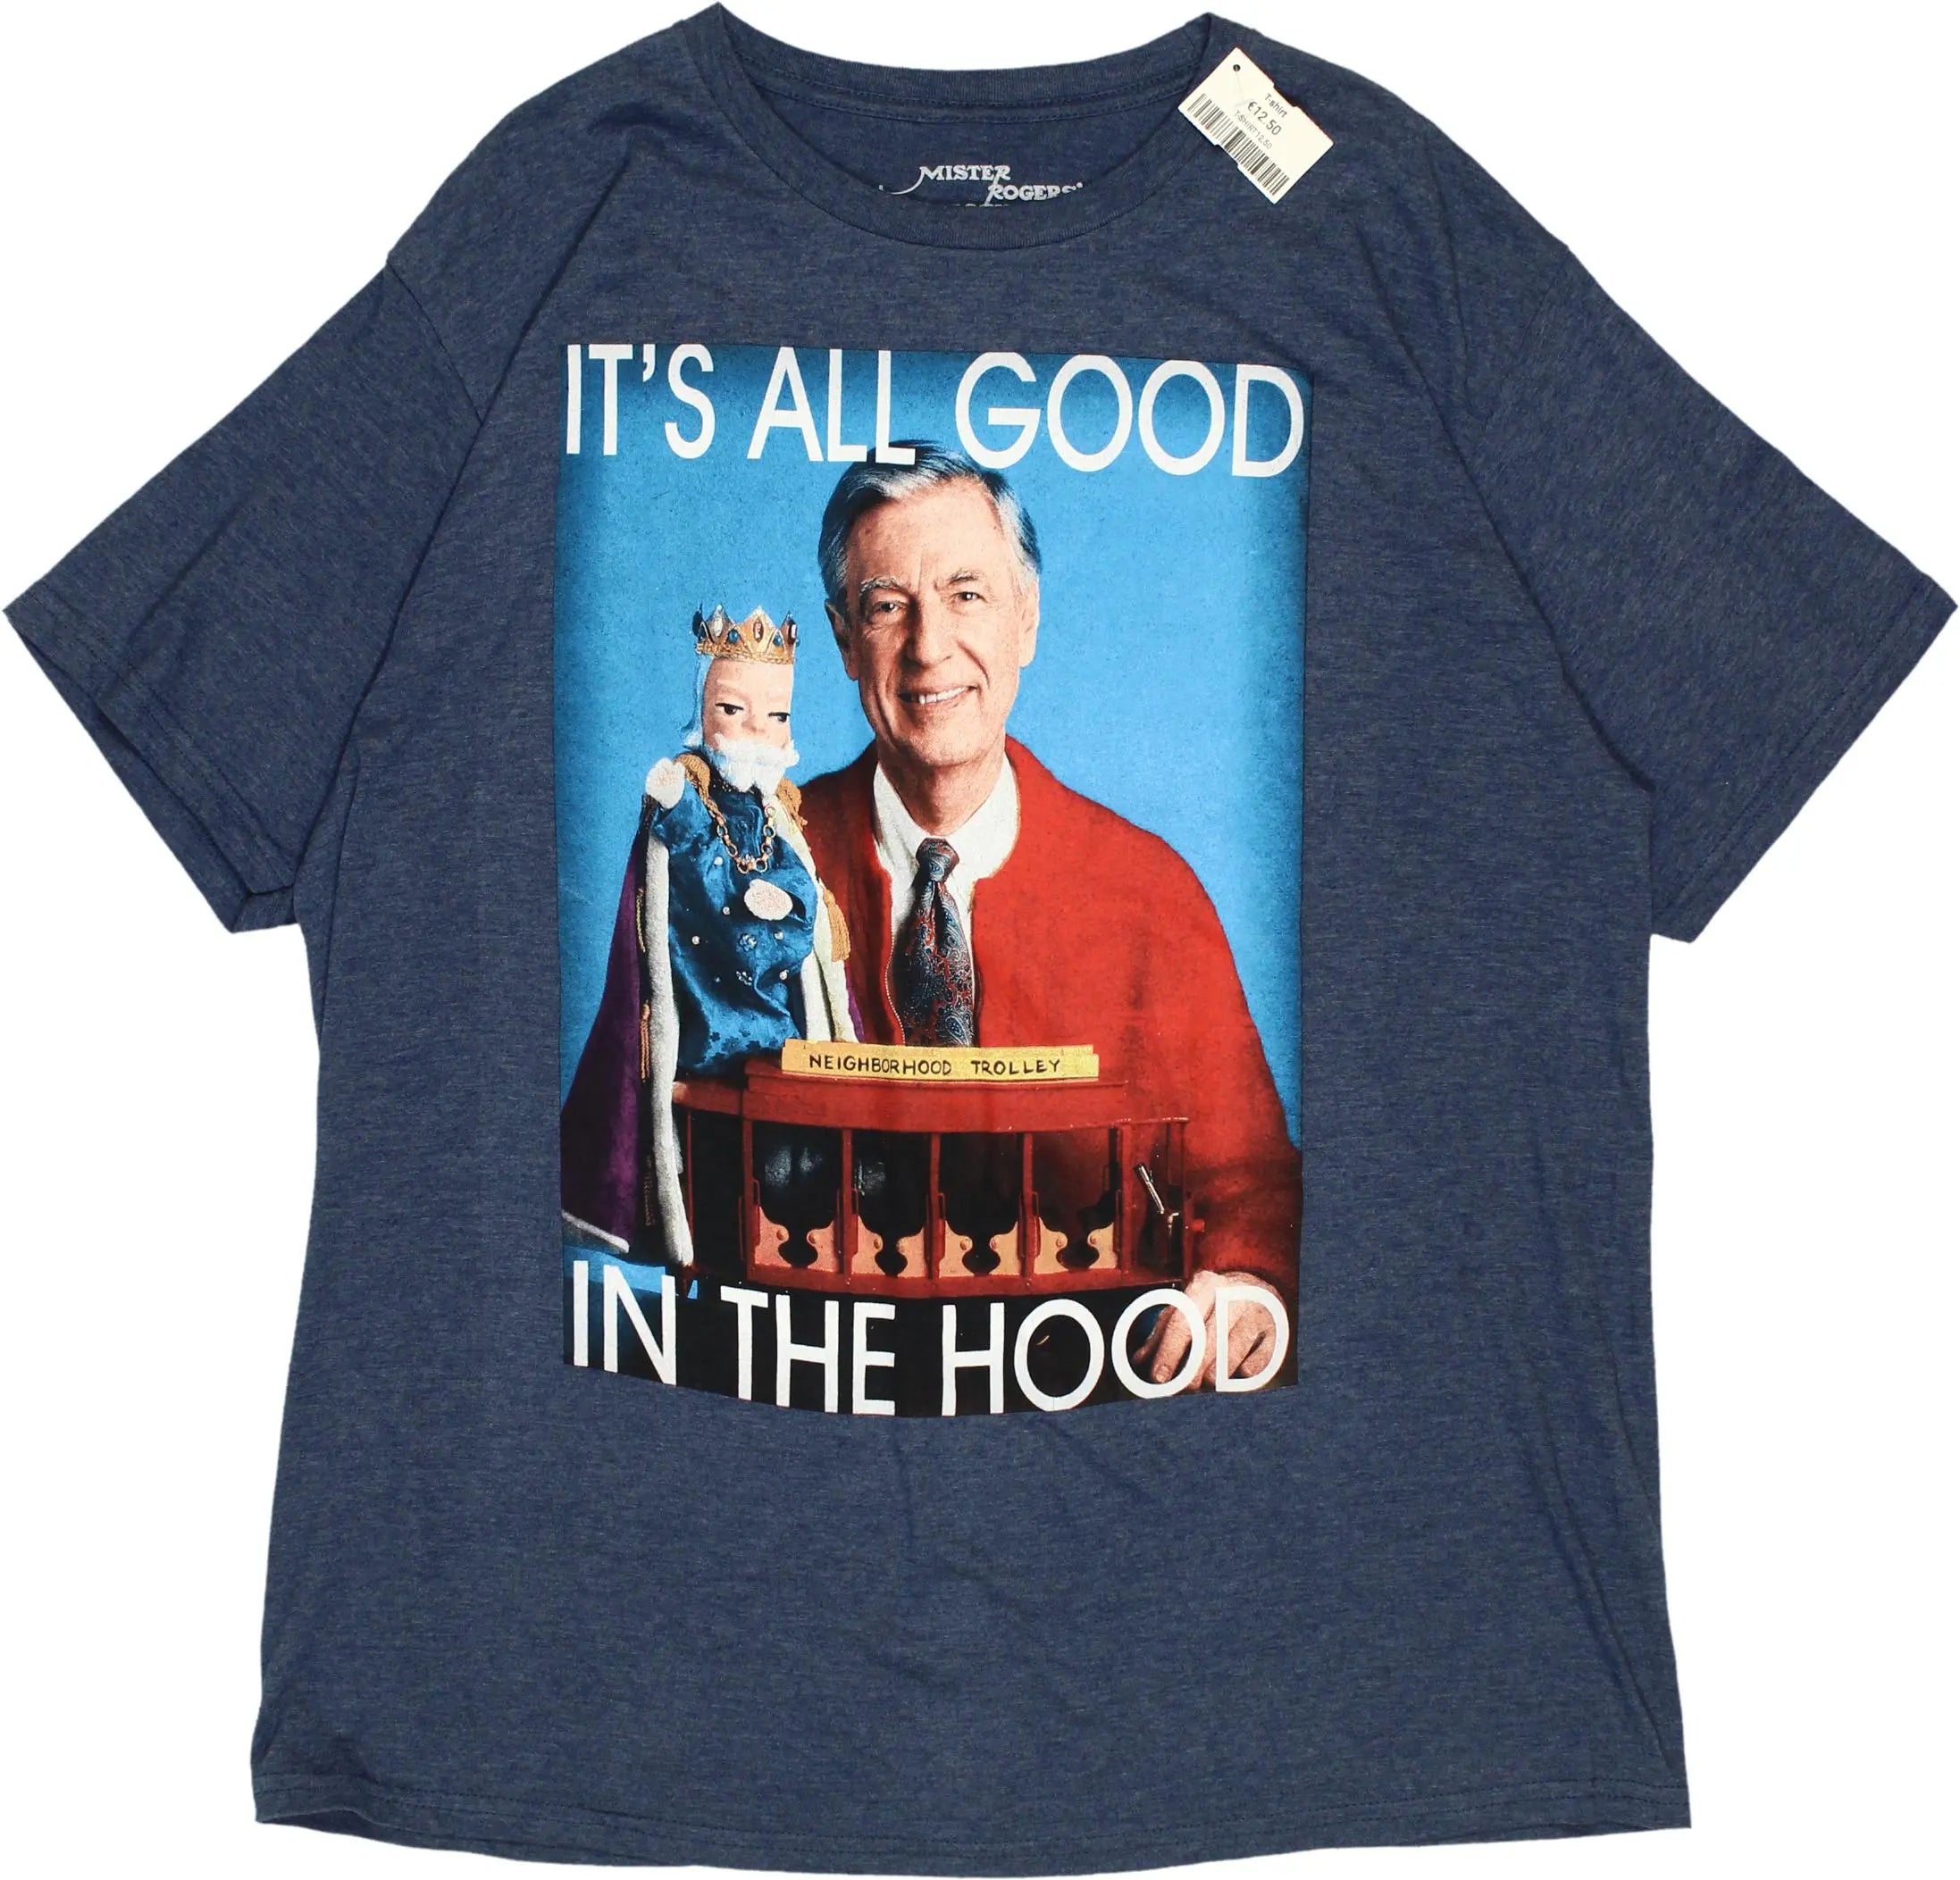 Mister Rogers Neighborhood - T-shirt- ThriftTale.com - Vintage and second handclothing